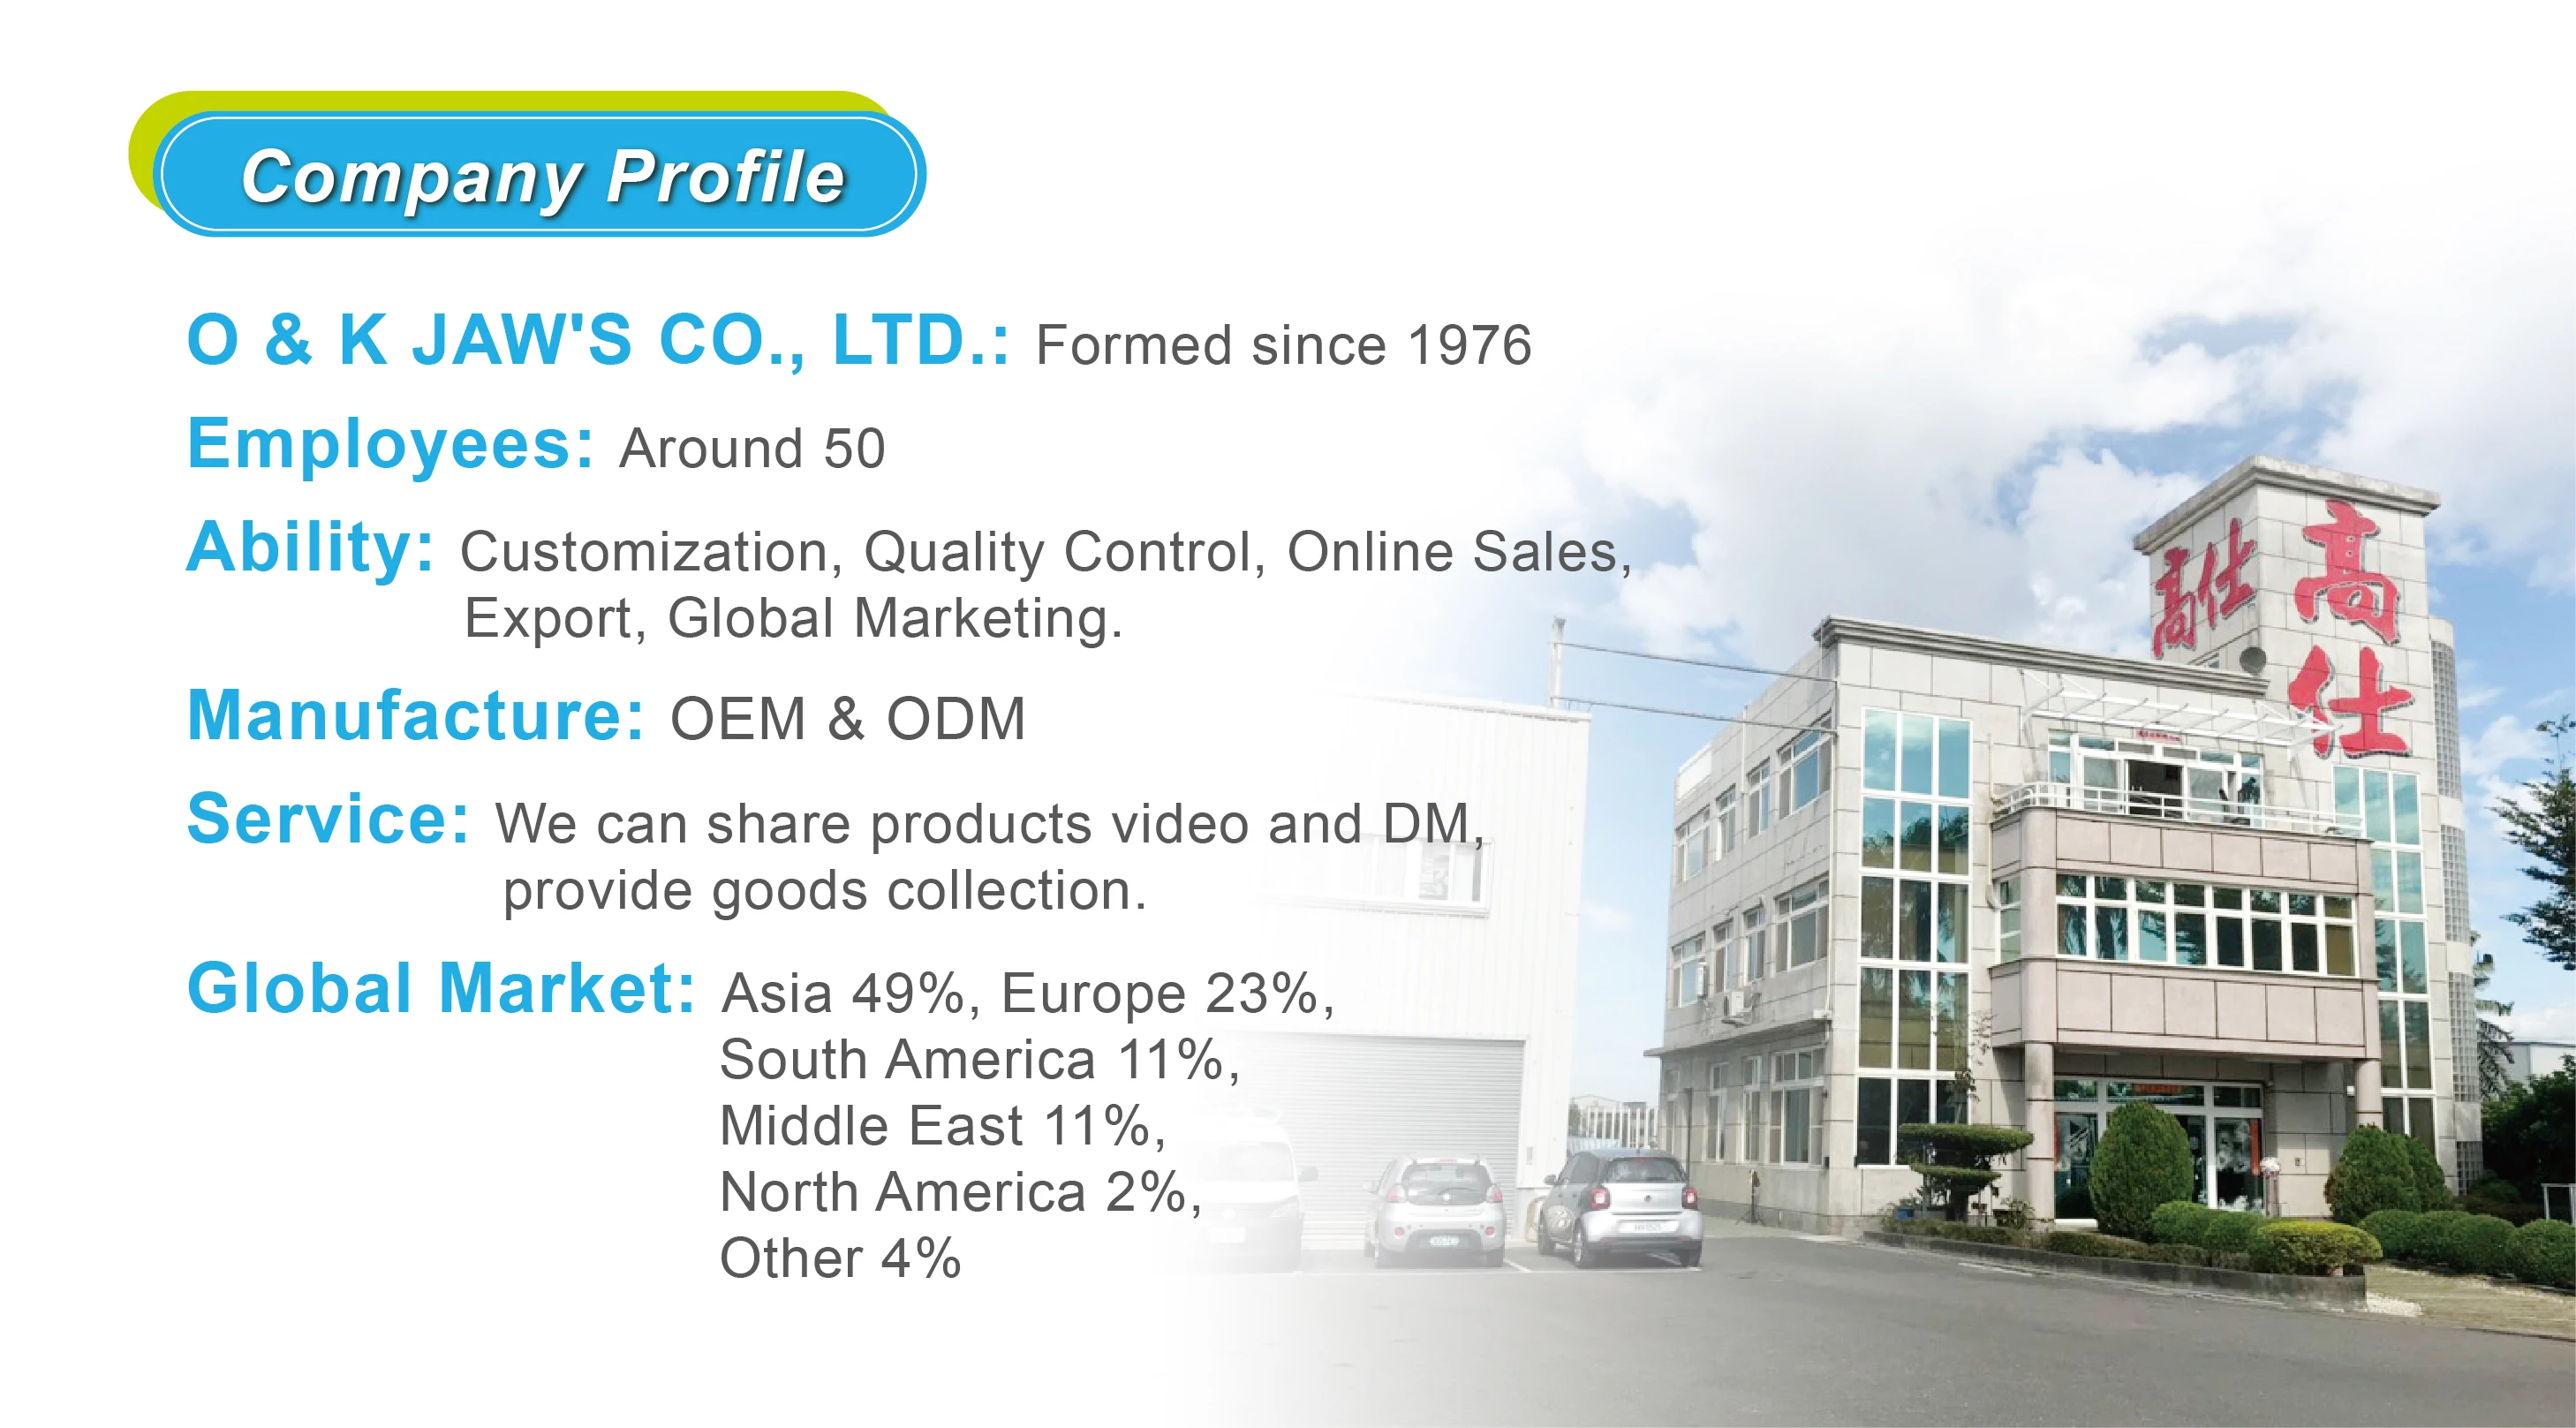 O & K JAWS CO. LTD. is founded in 1976 located in Taiwan, Hypersonic is our brand. All products make in Taiwan. O&K is one of the leading manufacturers in the Asian market that specializes in R&D, manufacturing, sales and OEM&ODM services for car accessories ( cell phone holder, Led light, hanger, antenna, blind spot mirror, USB car charger and power socket, etc.   40 years presence in the market substantiates O&K's continuous growth.  O&K has significantly expanded over the years. At present, Our company with an annual production capacity of 200,000 pieces and export to all over the world.